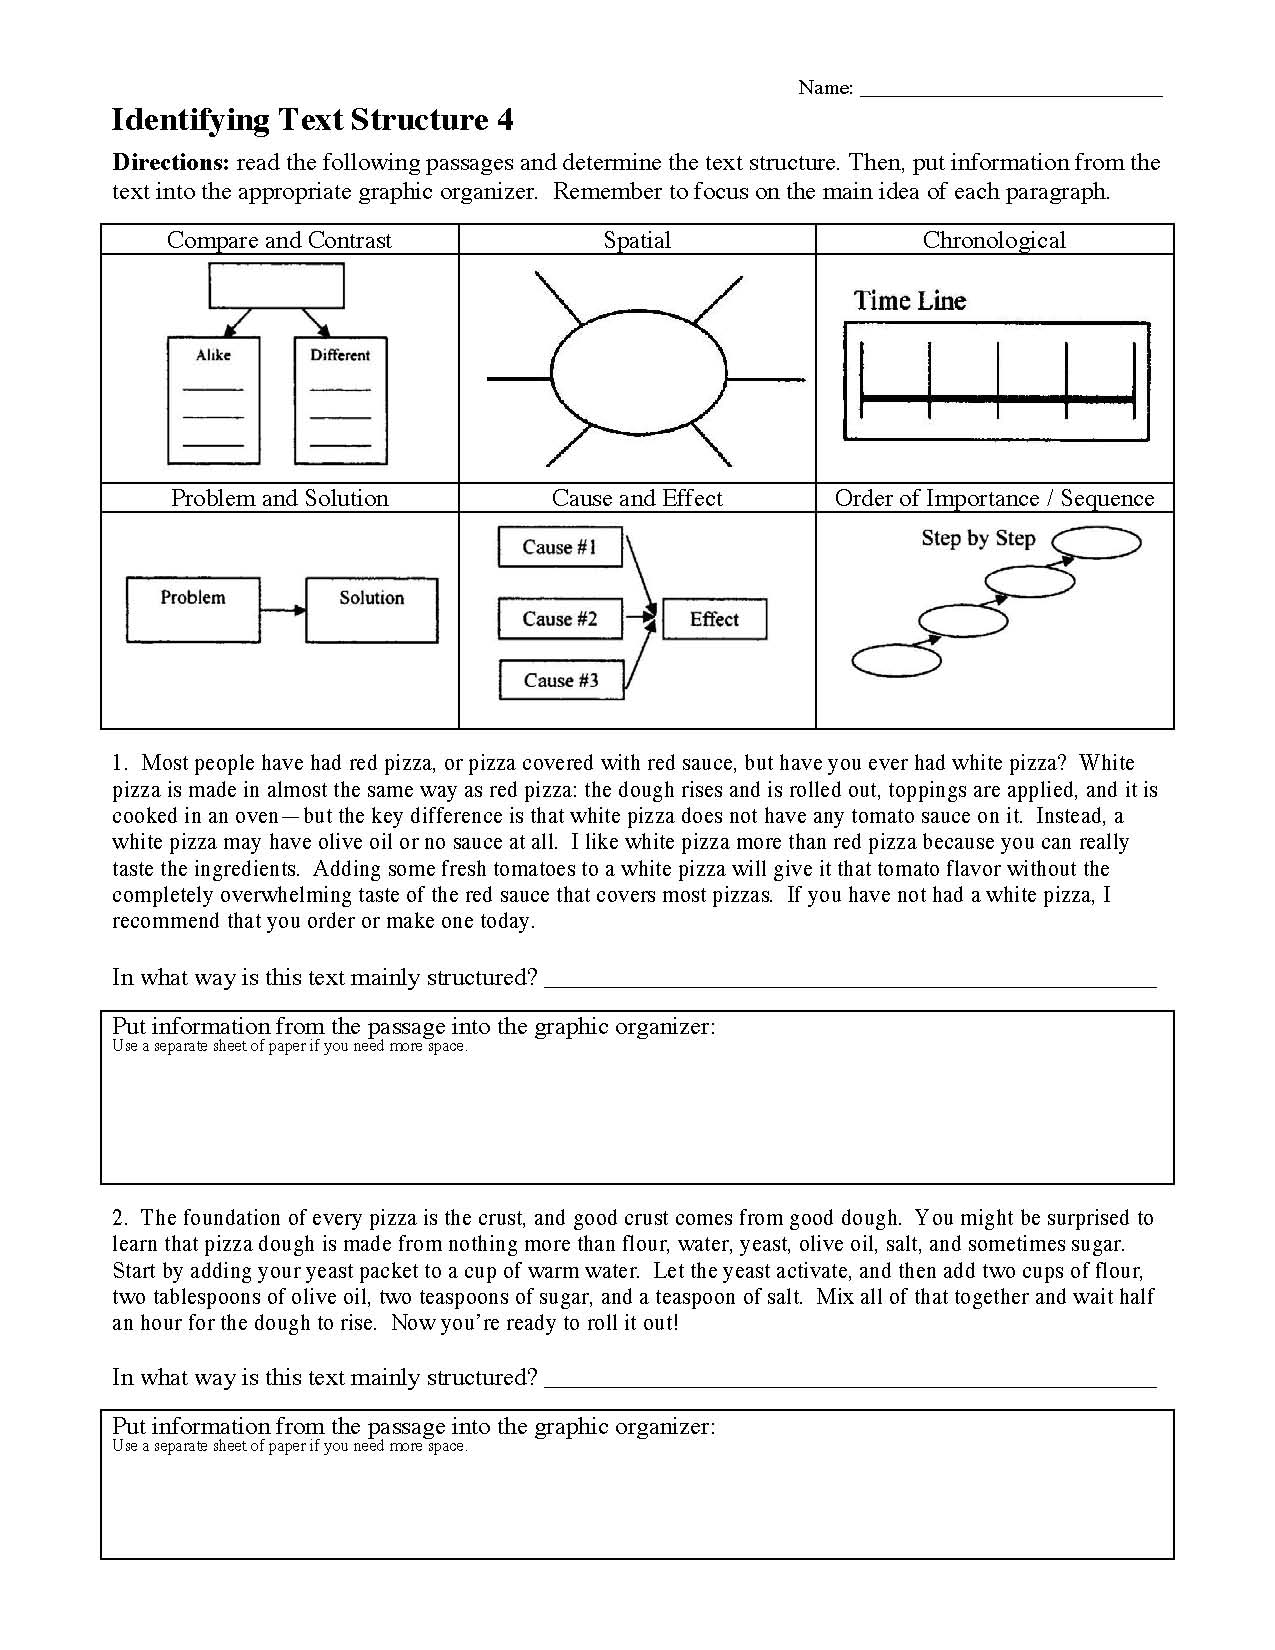 free-printable-text-structure-worksheets-printable-templates